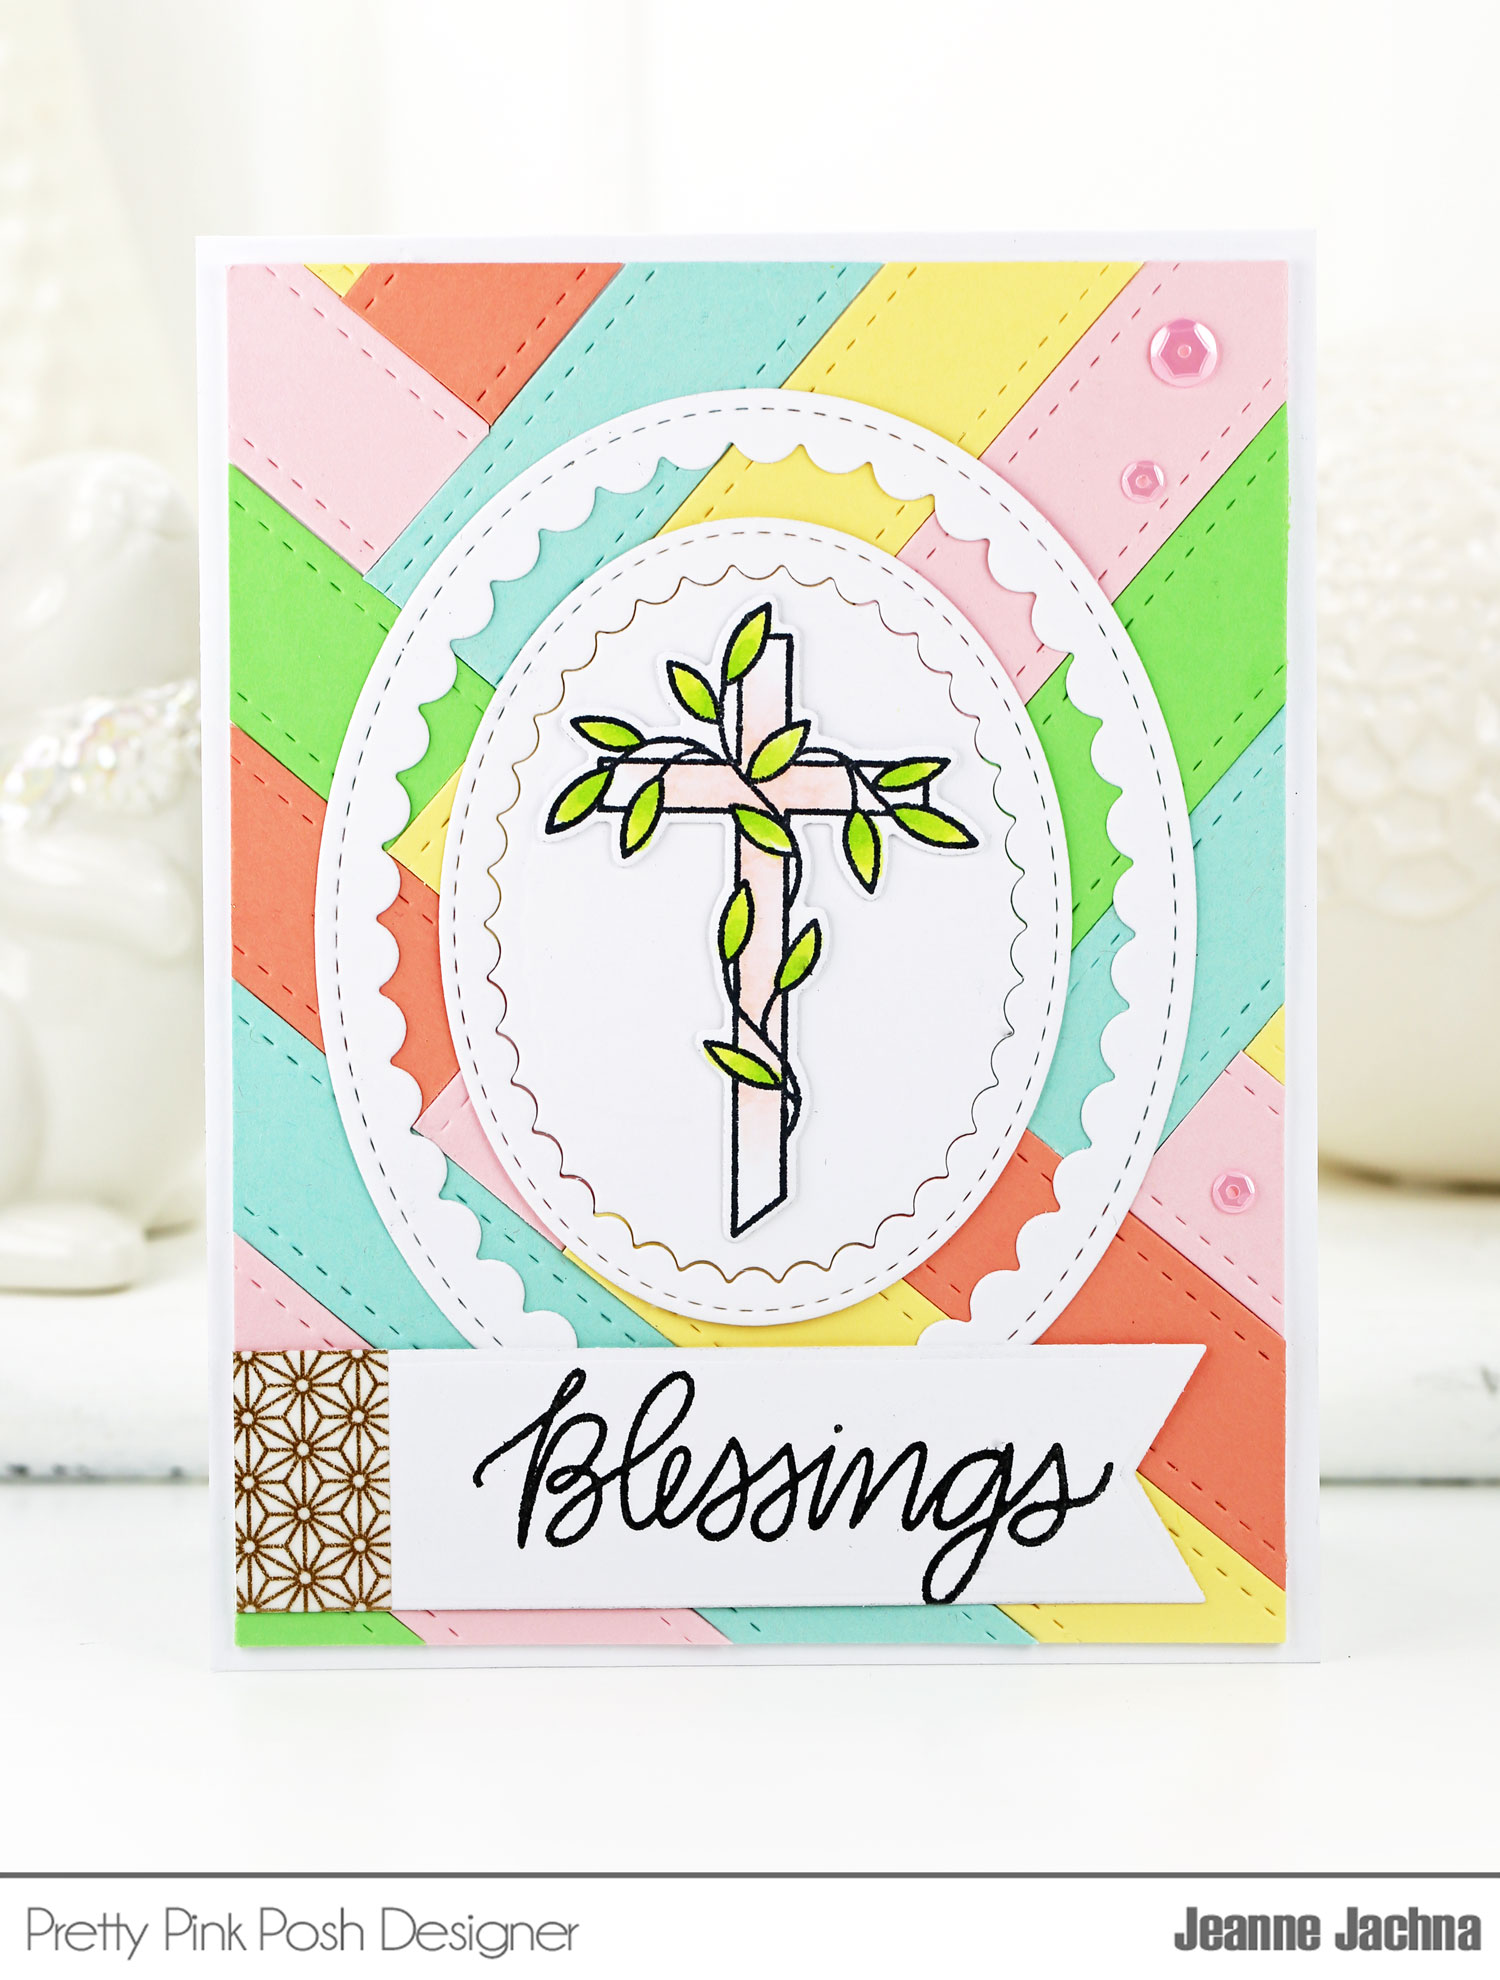 Blessings card by Jeanne Jachna